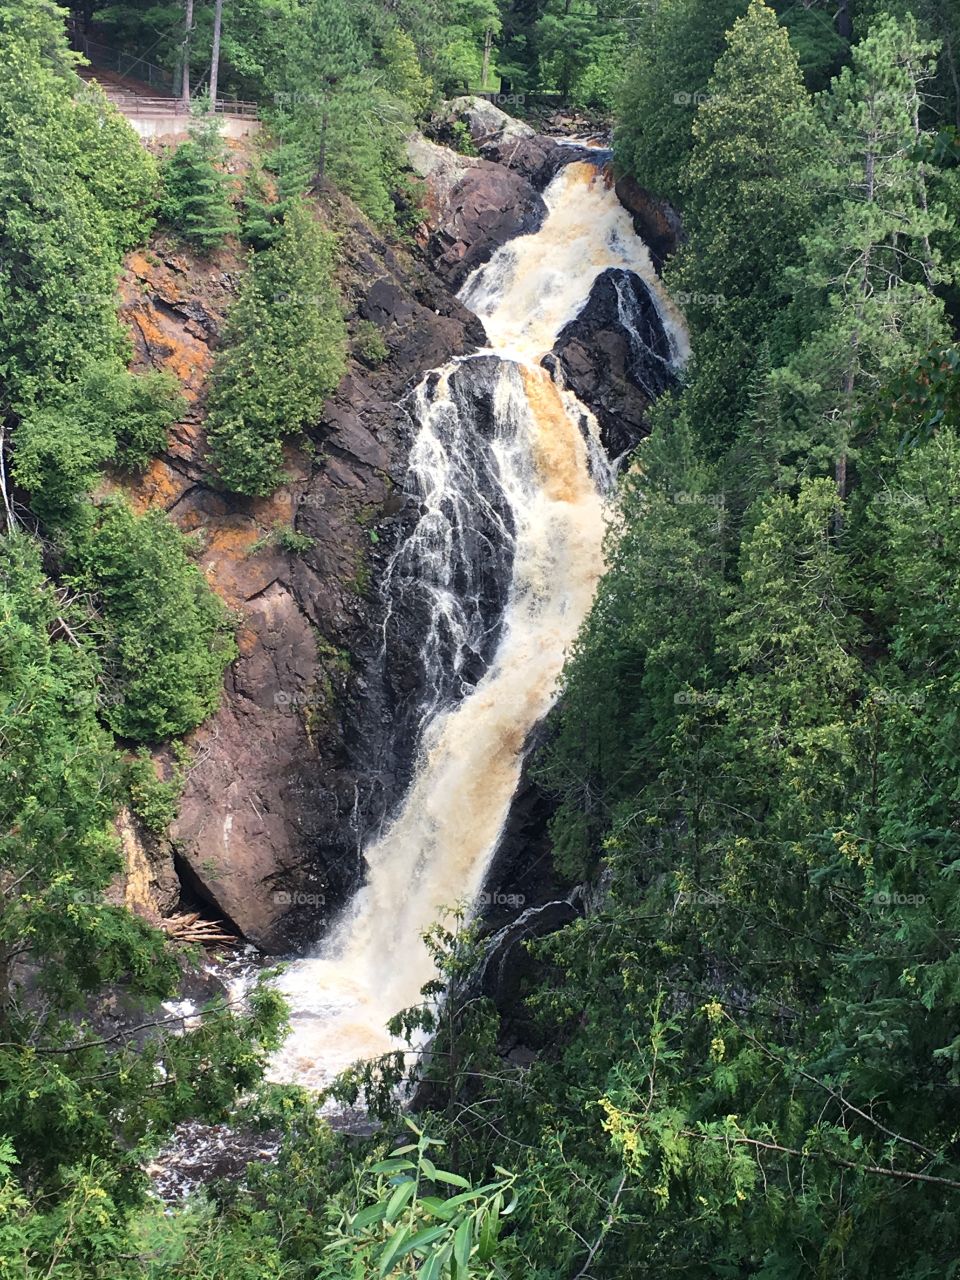 The largest waterfall in Pattison State Park in Wisconsin